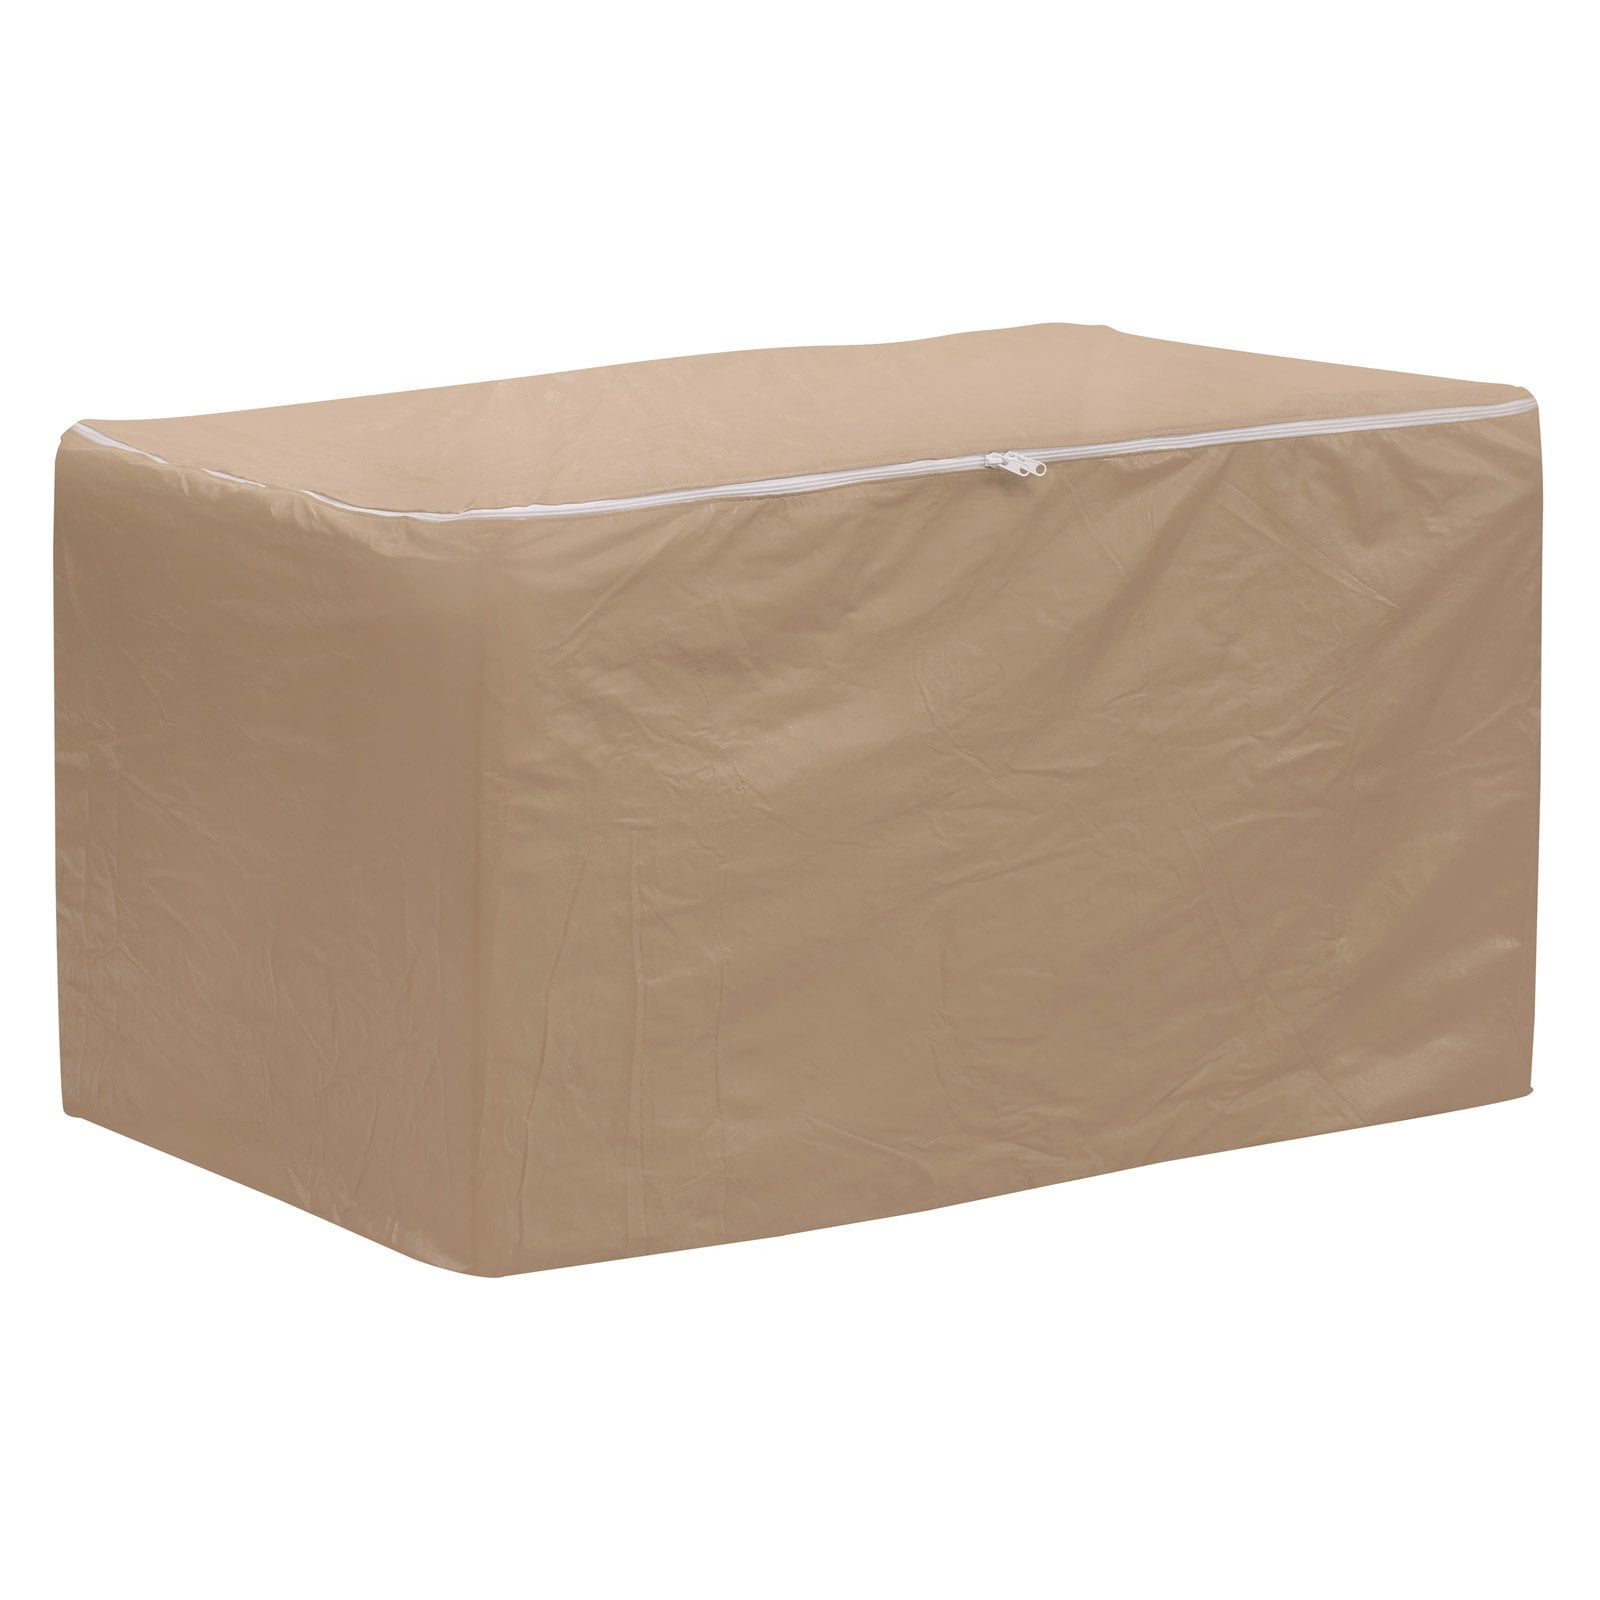 Waterproof Cushion Cover Storage Bag Outdoor Garden Patio Furniture Protection 